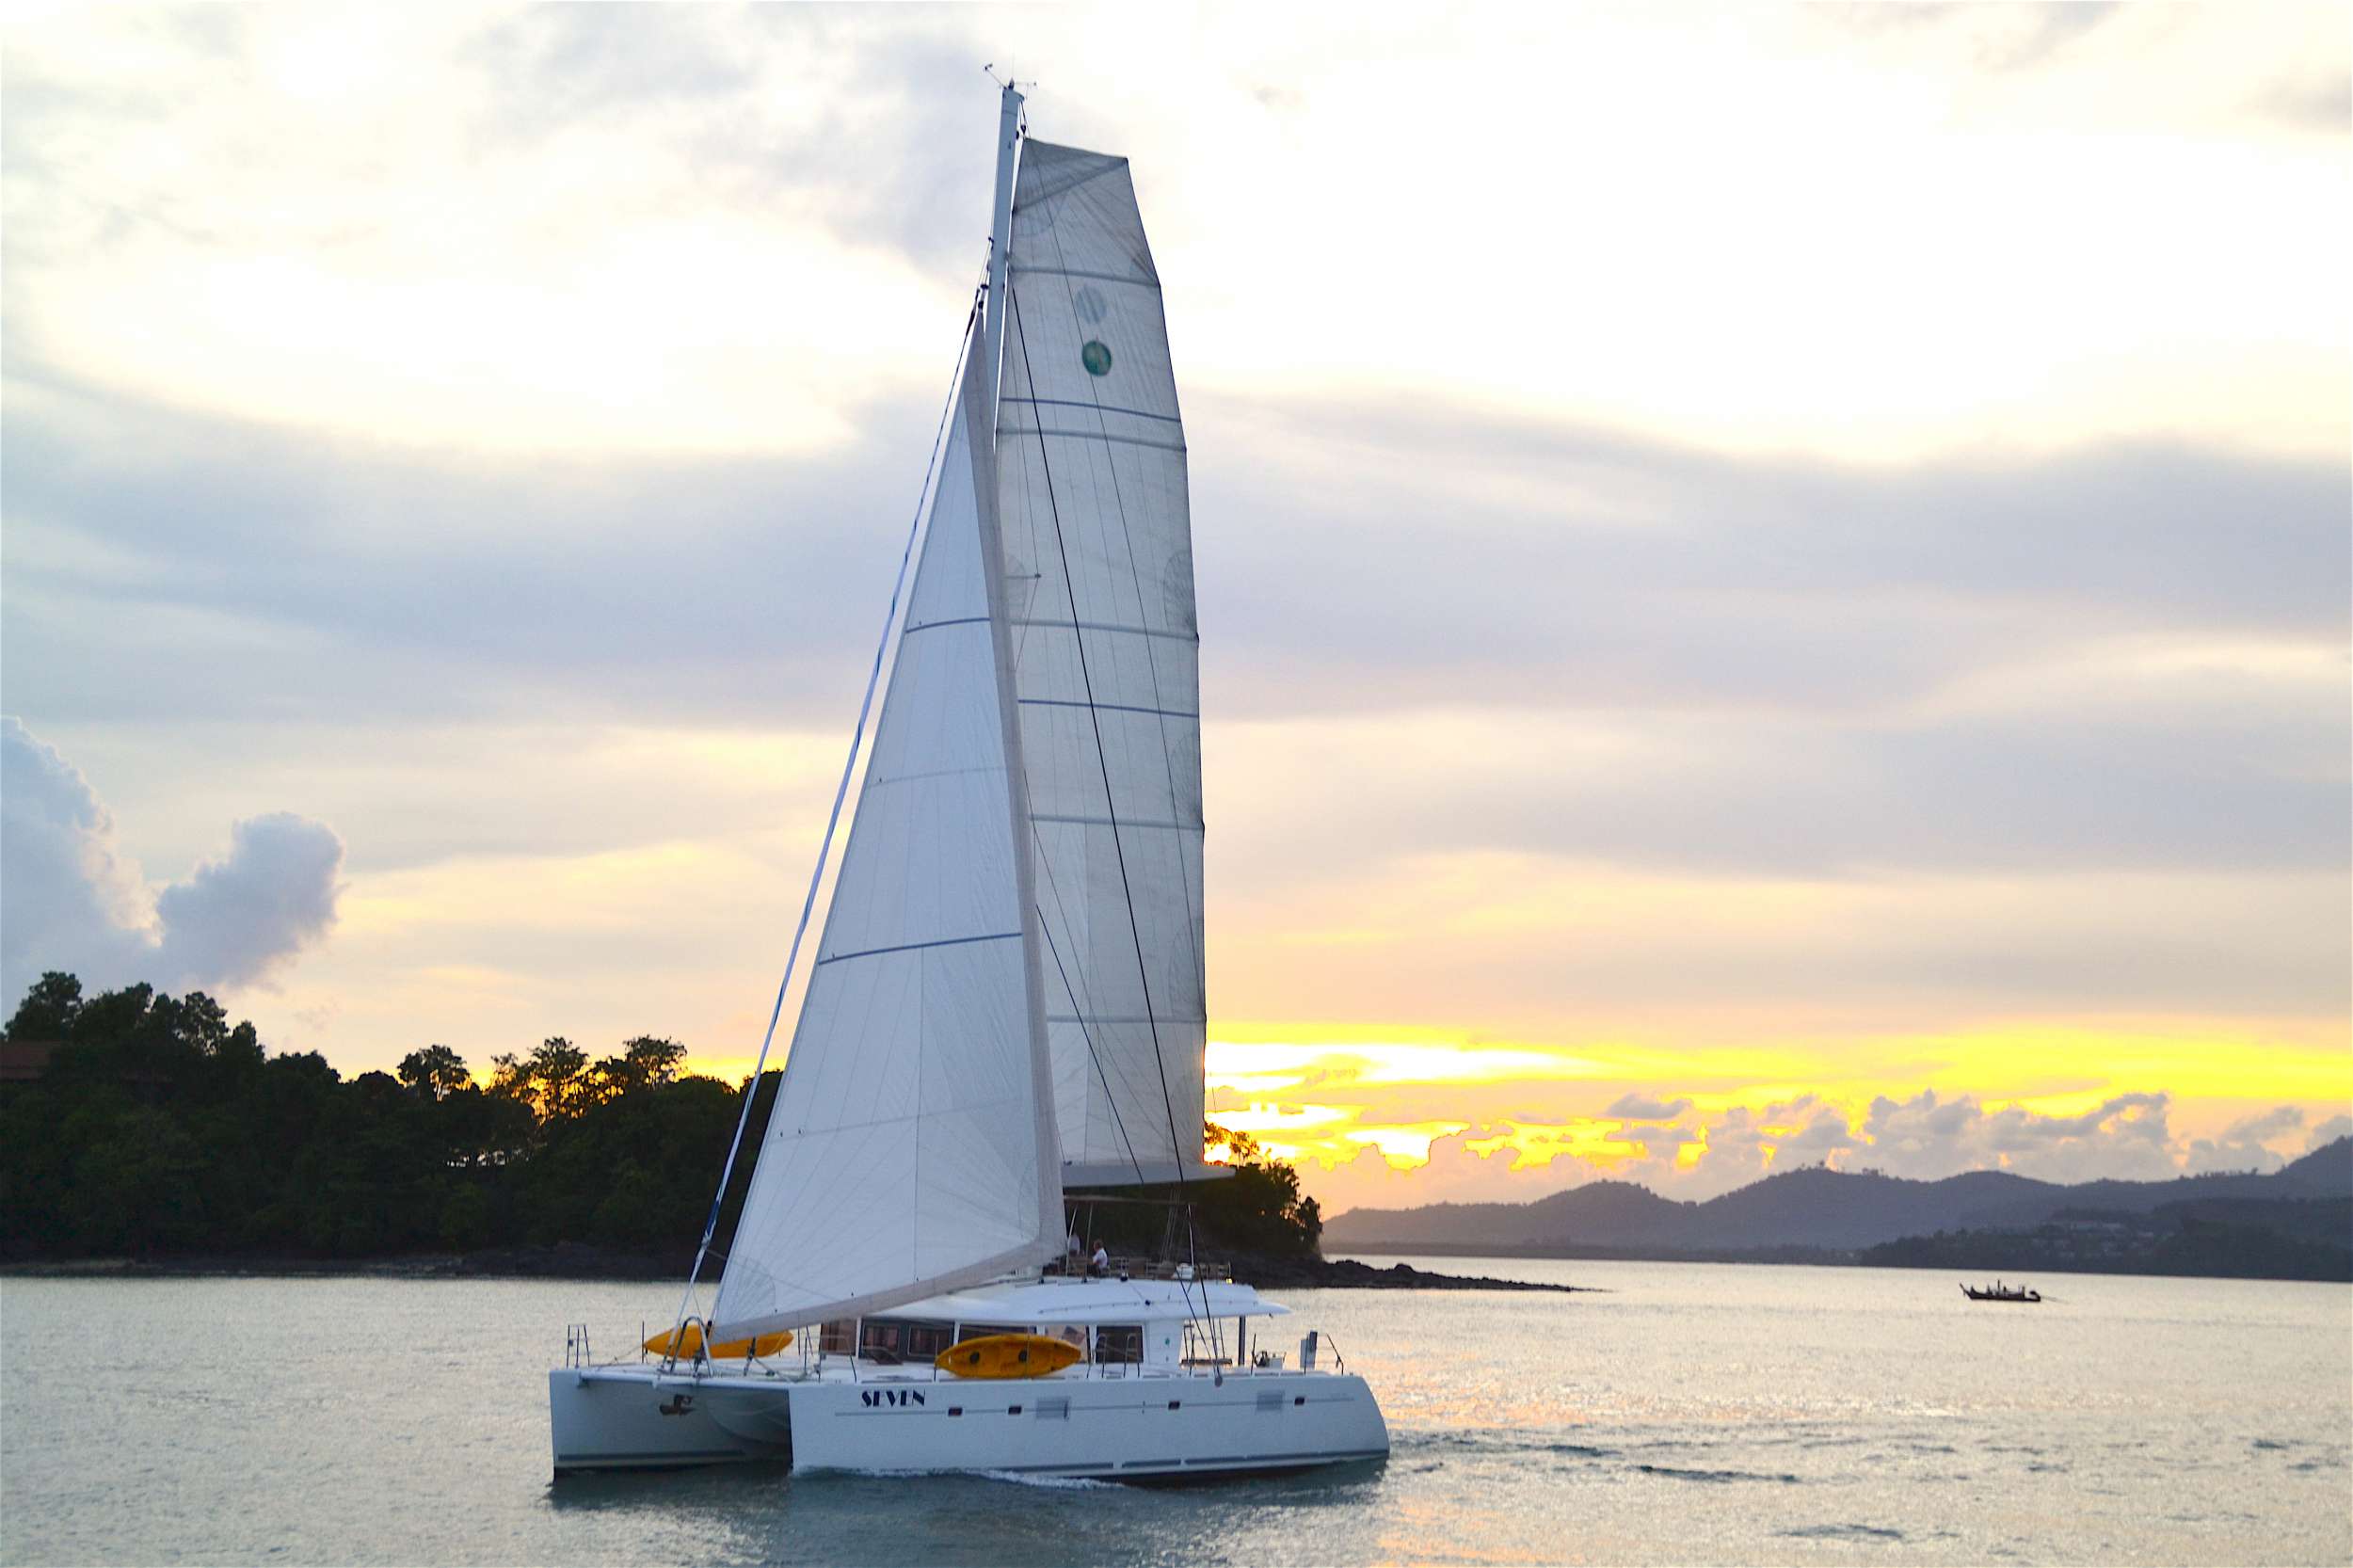 00SEVEN - Yacht Charter Malaysia & Boat hire in SE Asia 2